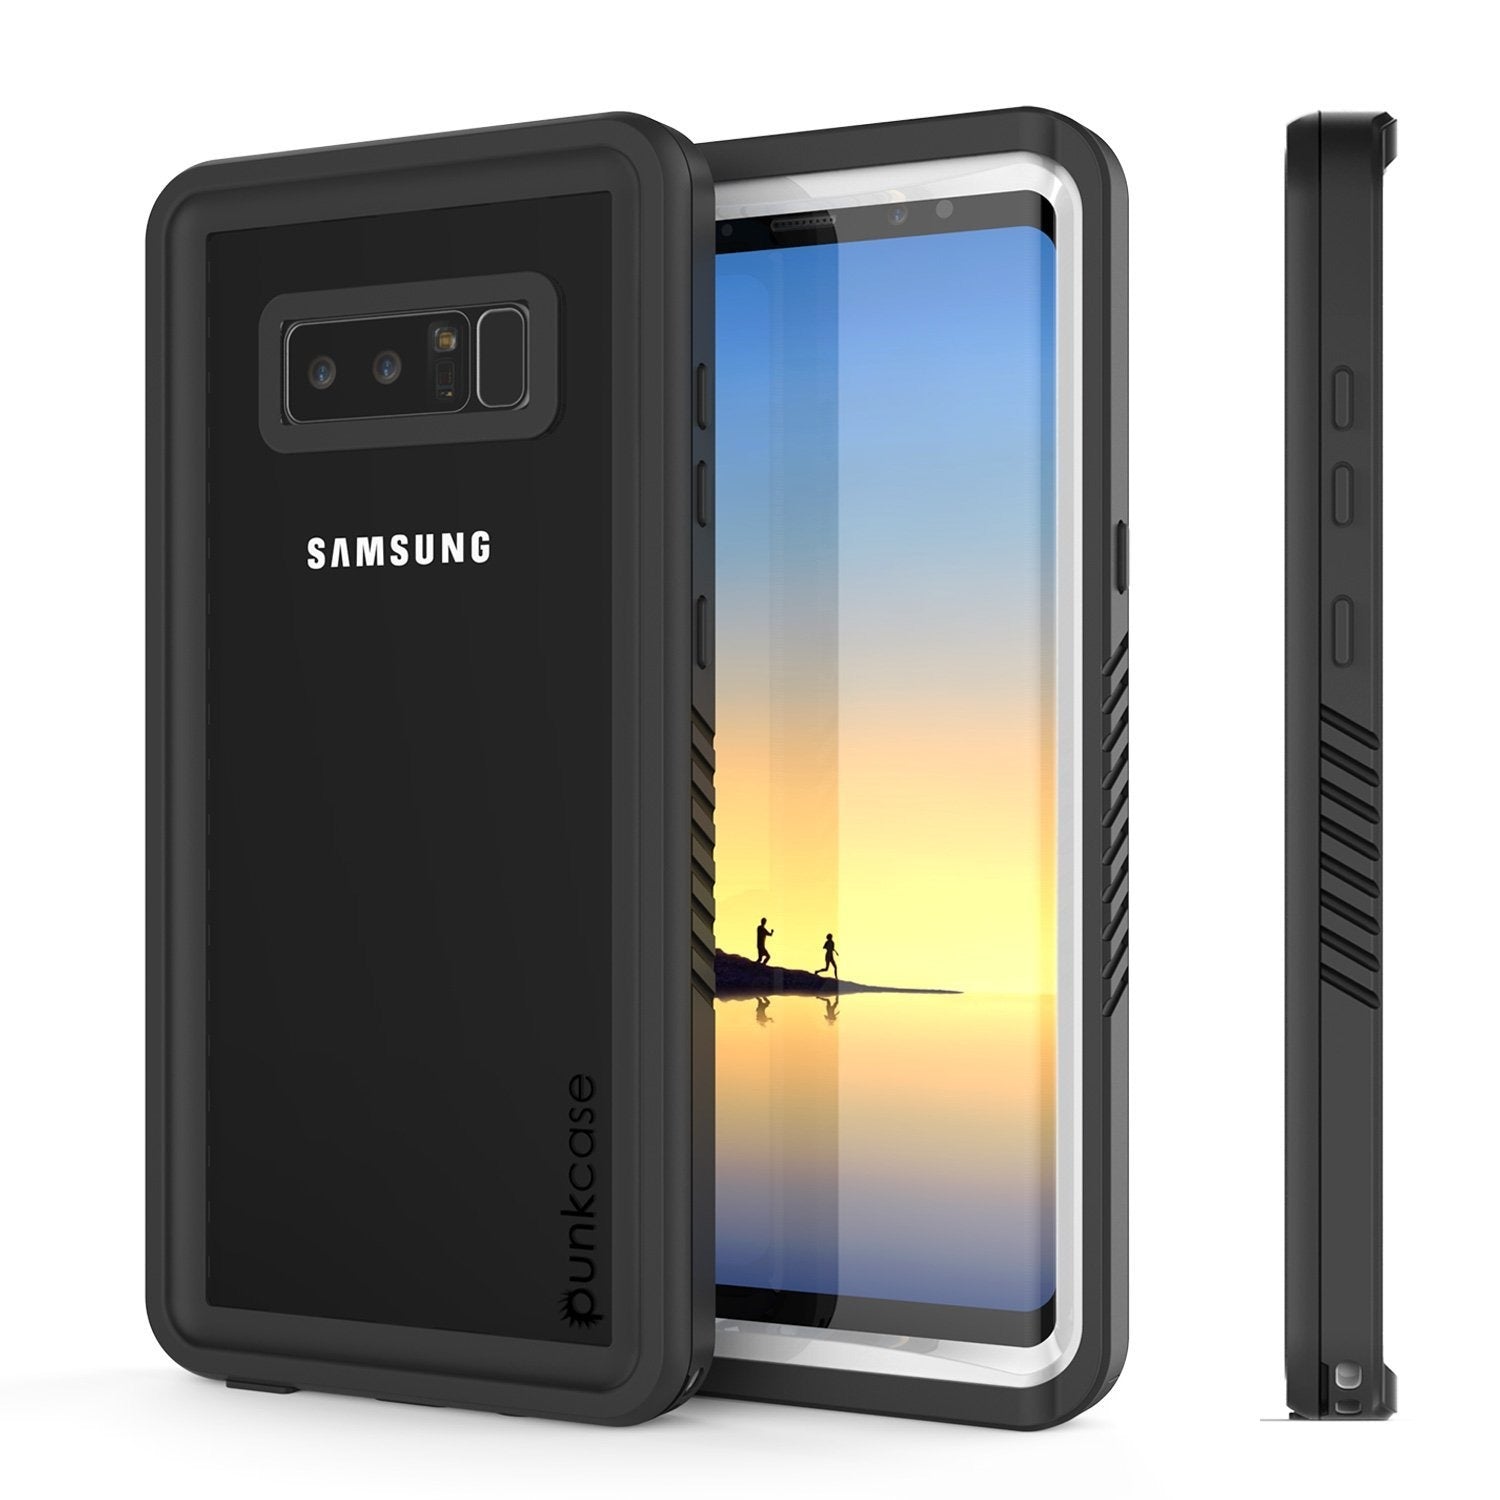 Galaxy Note 8 Punkcase Extreme Series W/ Built In Screen Case White